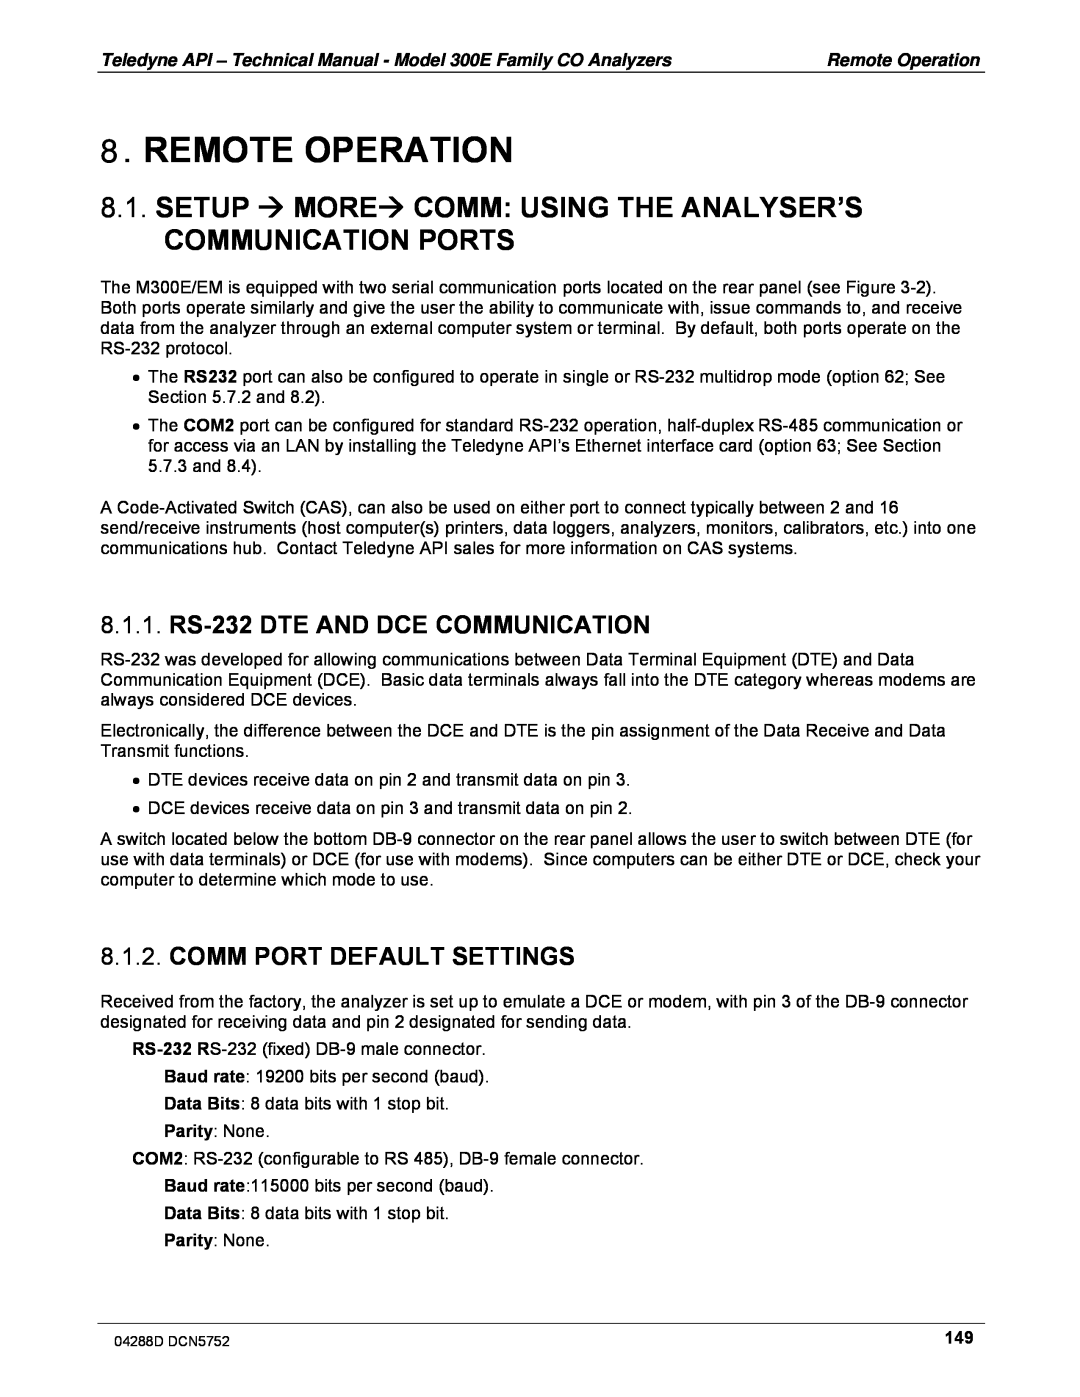 Teledyne M300EM operation manual Remote Operation, 8.1.1.RS-232DTE AND DCE COMMUNICATION, Comm Port Default Settings 